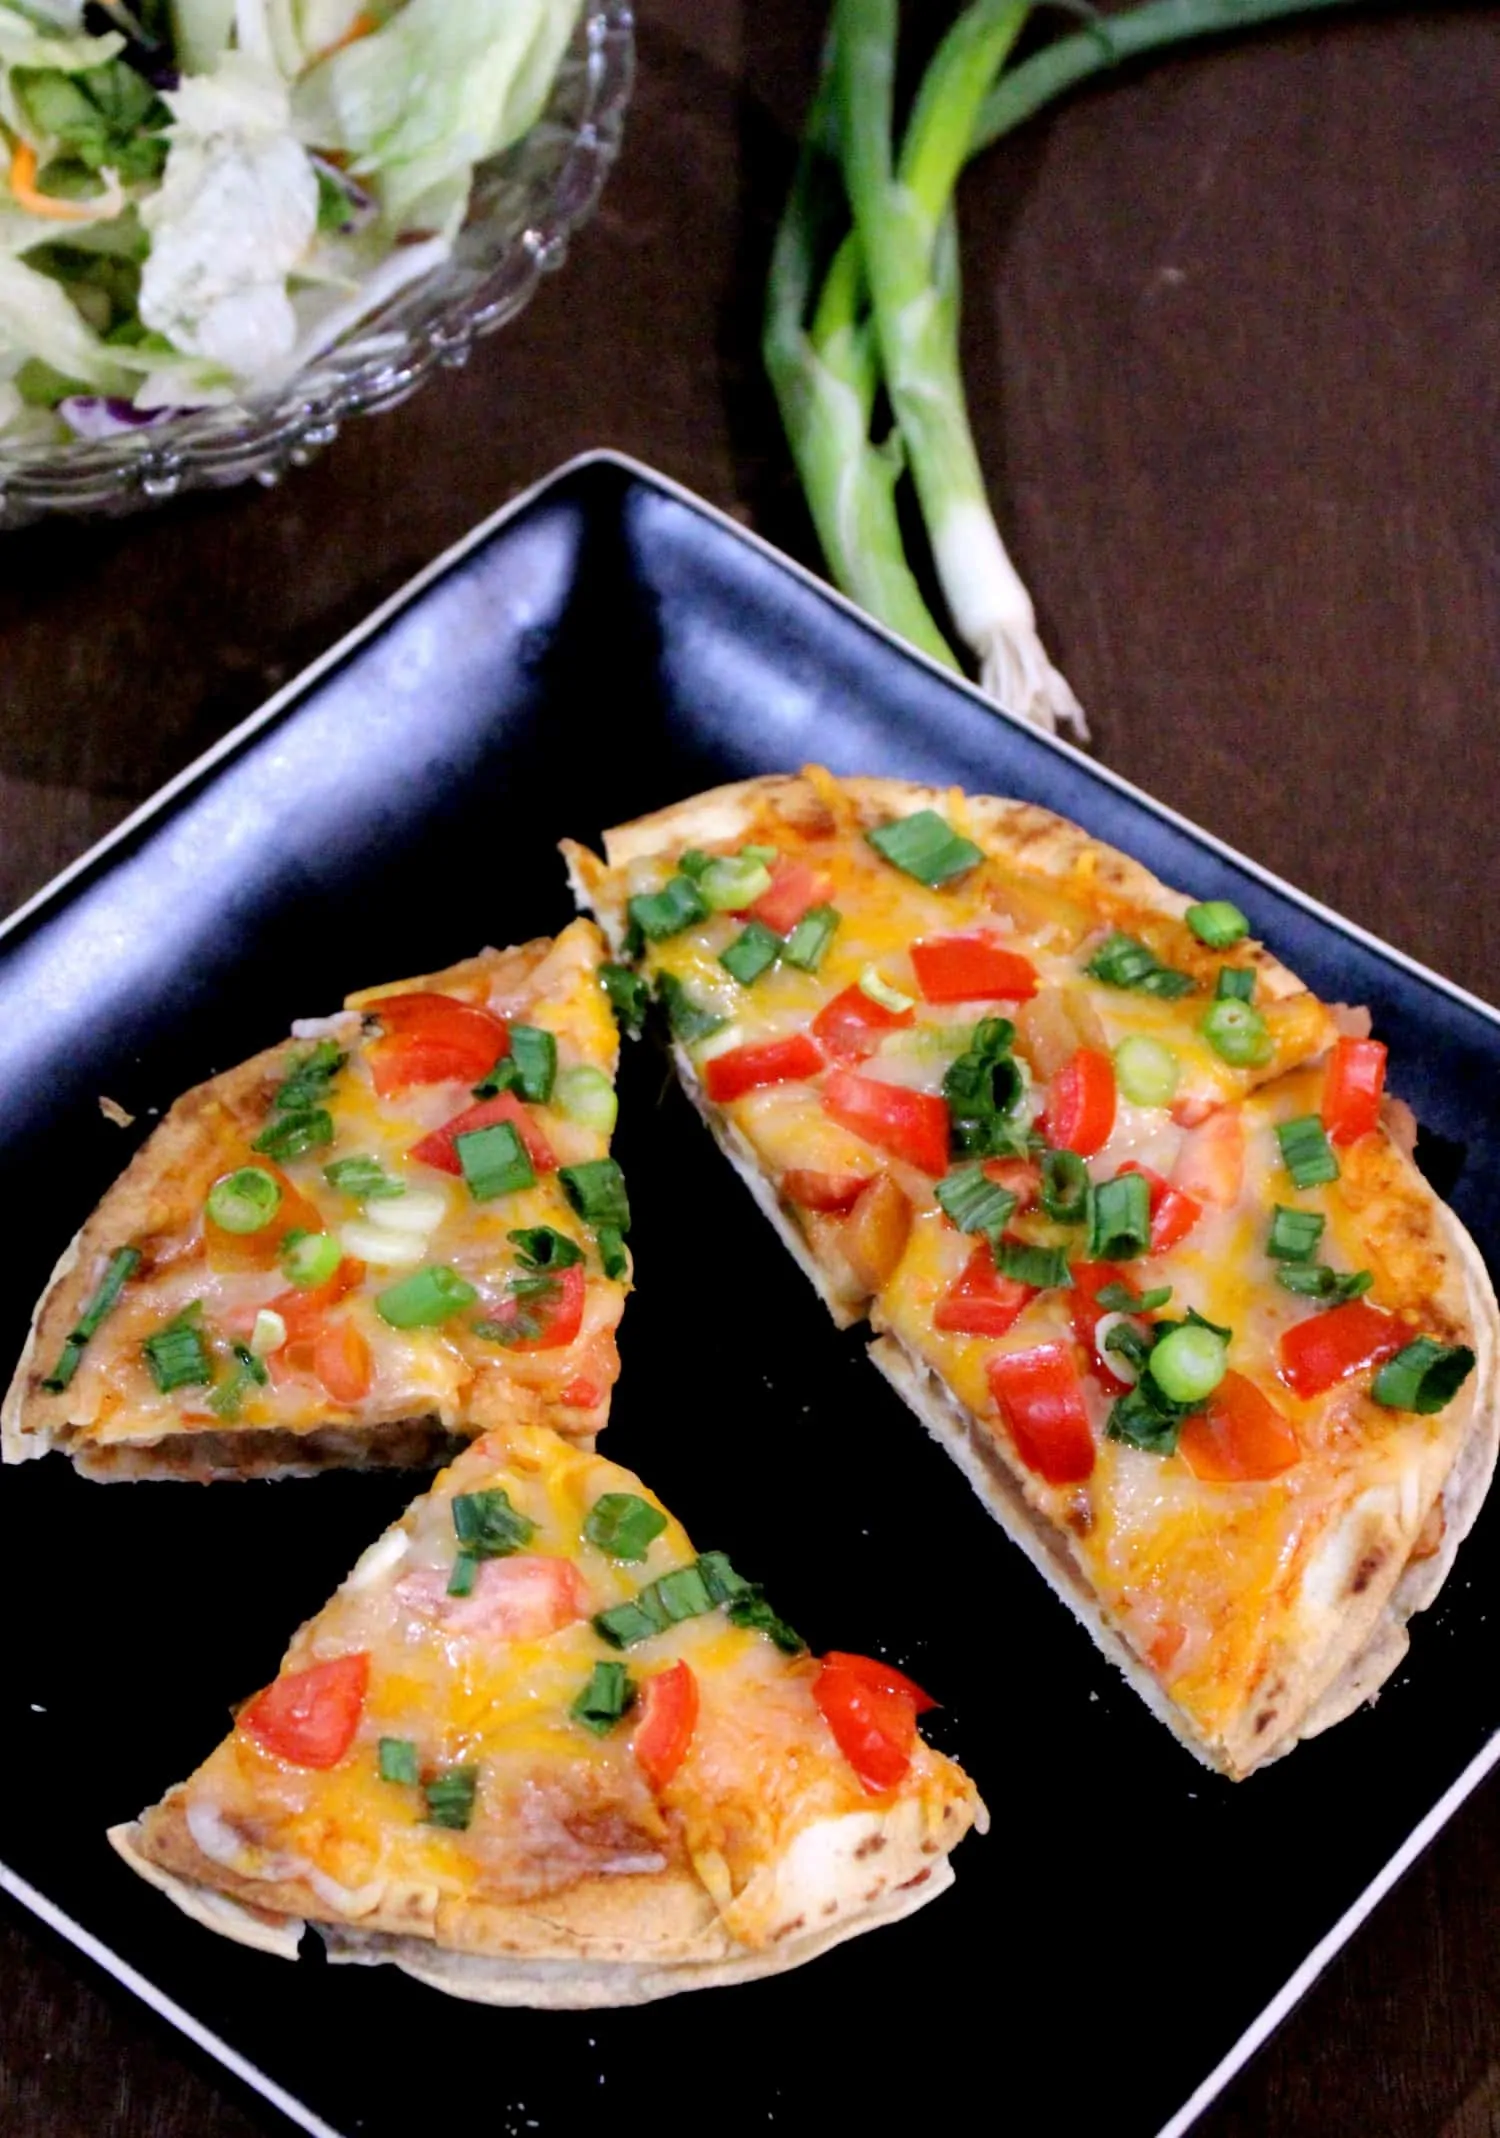 Taco Bell Style Vegetarian Mexican Pizza is served in a black dish